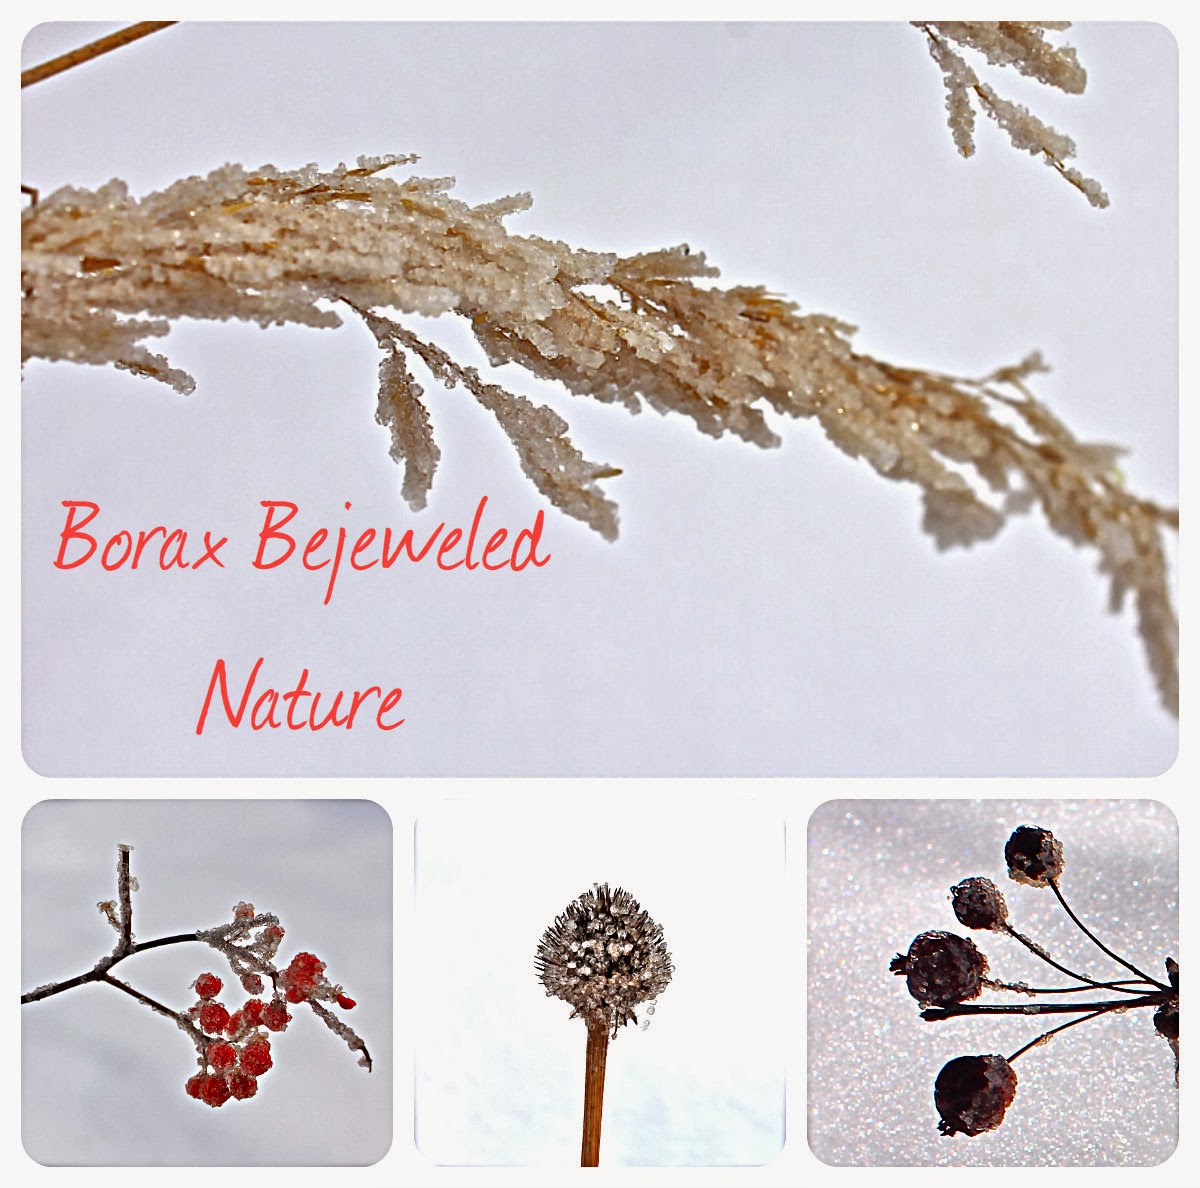 Twig and Toadstool Borax Bejeweled Bits Of Nature image